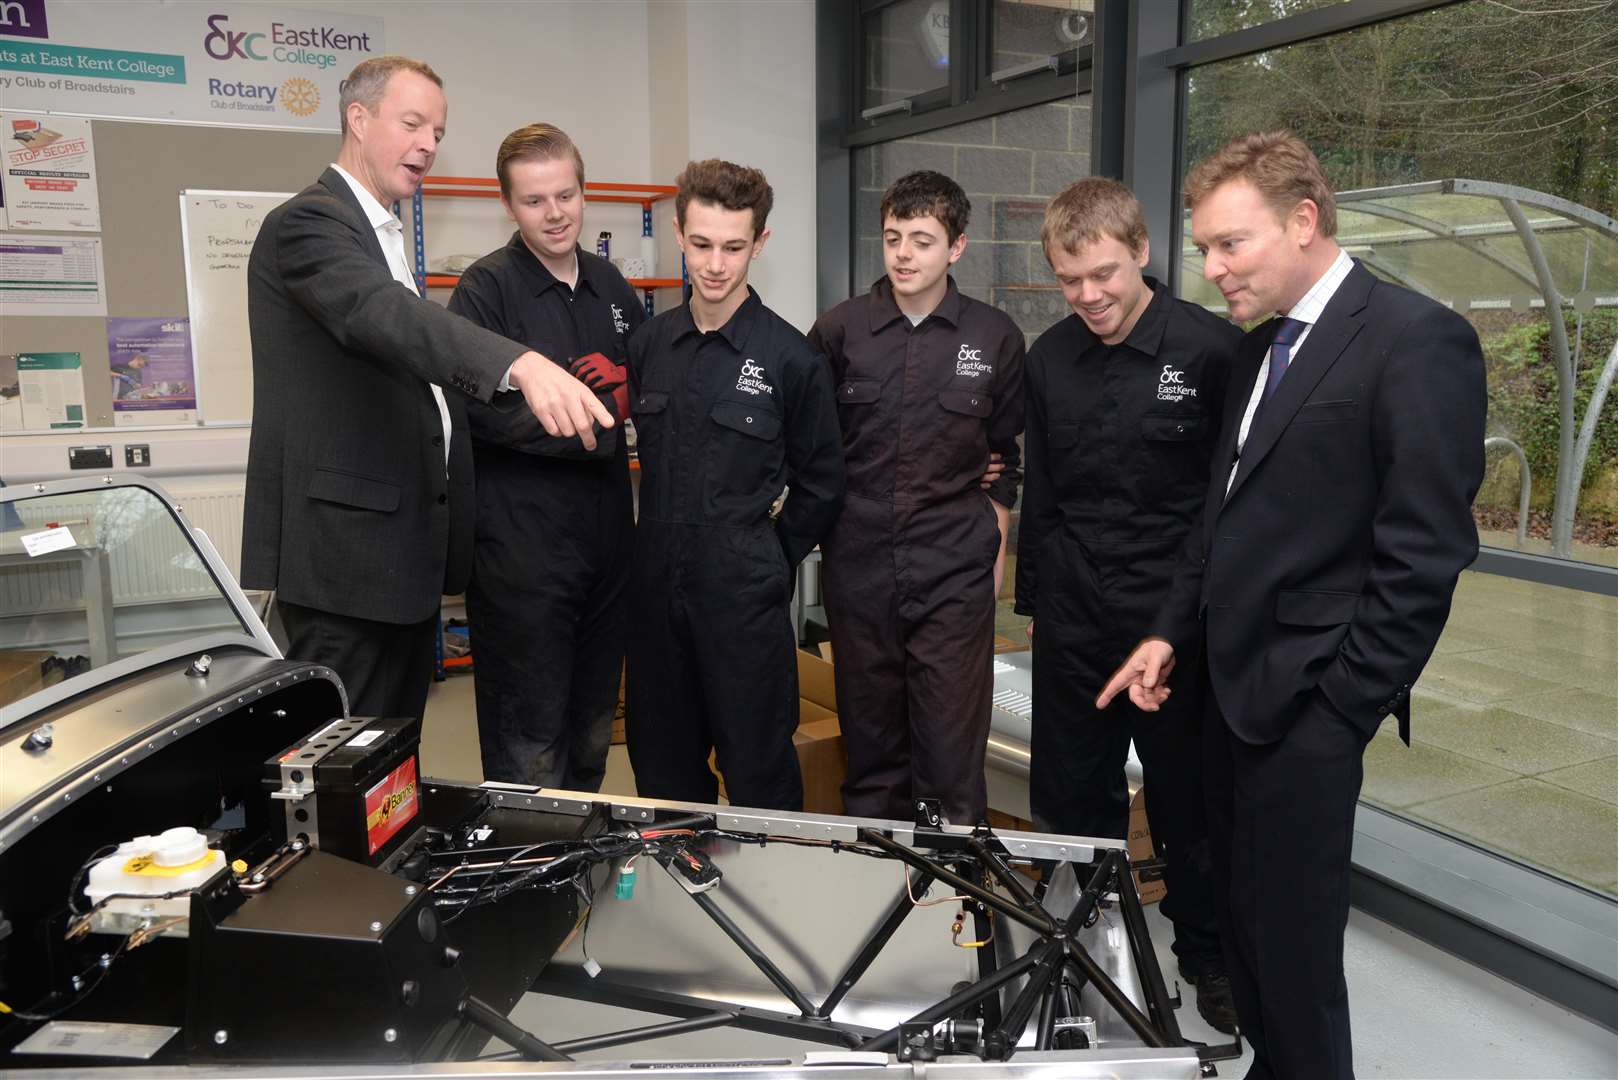 Education minister Nick Boles (left) and prospective parliamentary candidate Craig Mackinlay (right) with students working on the Caterham car at East Kent College.